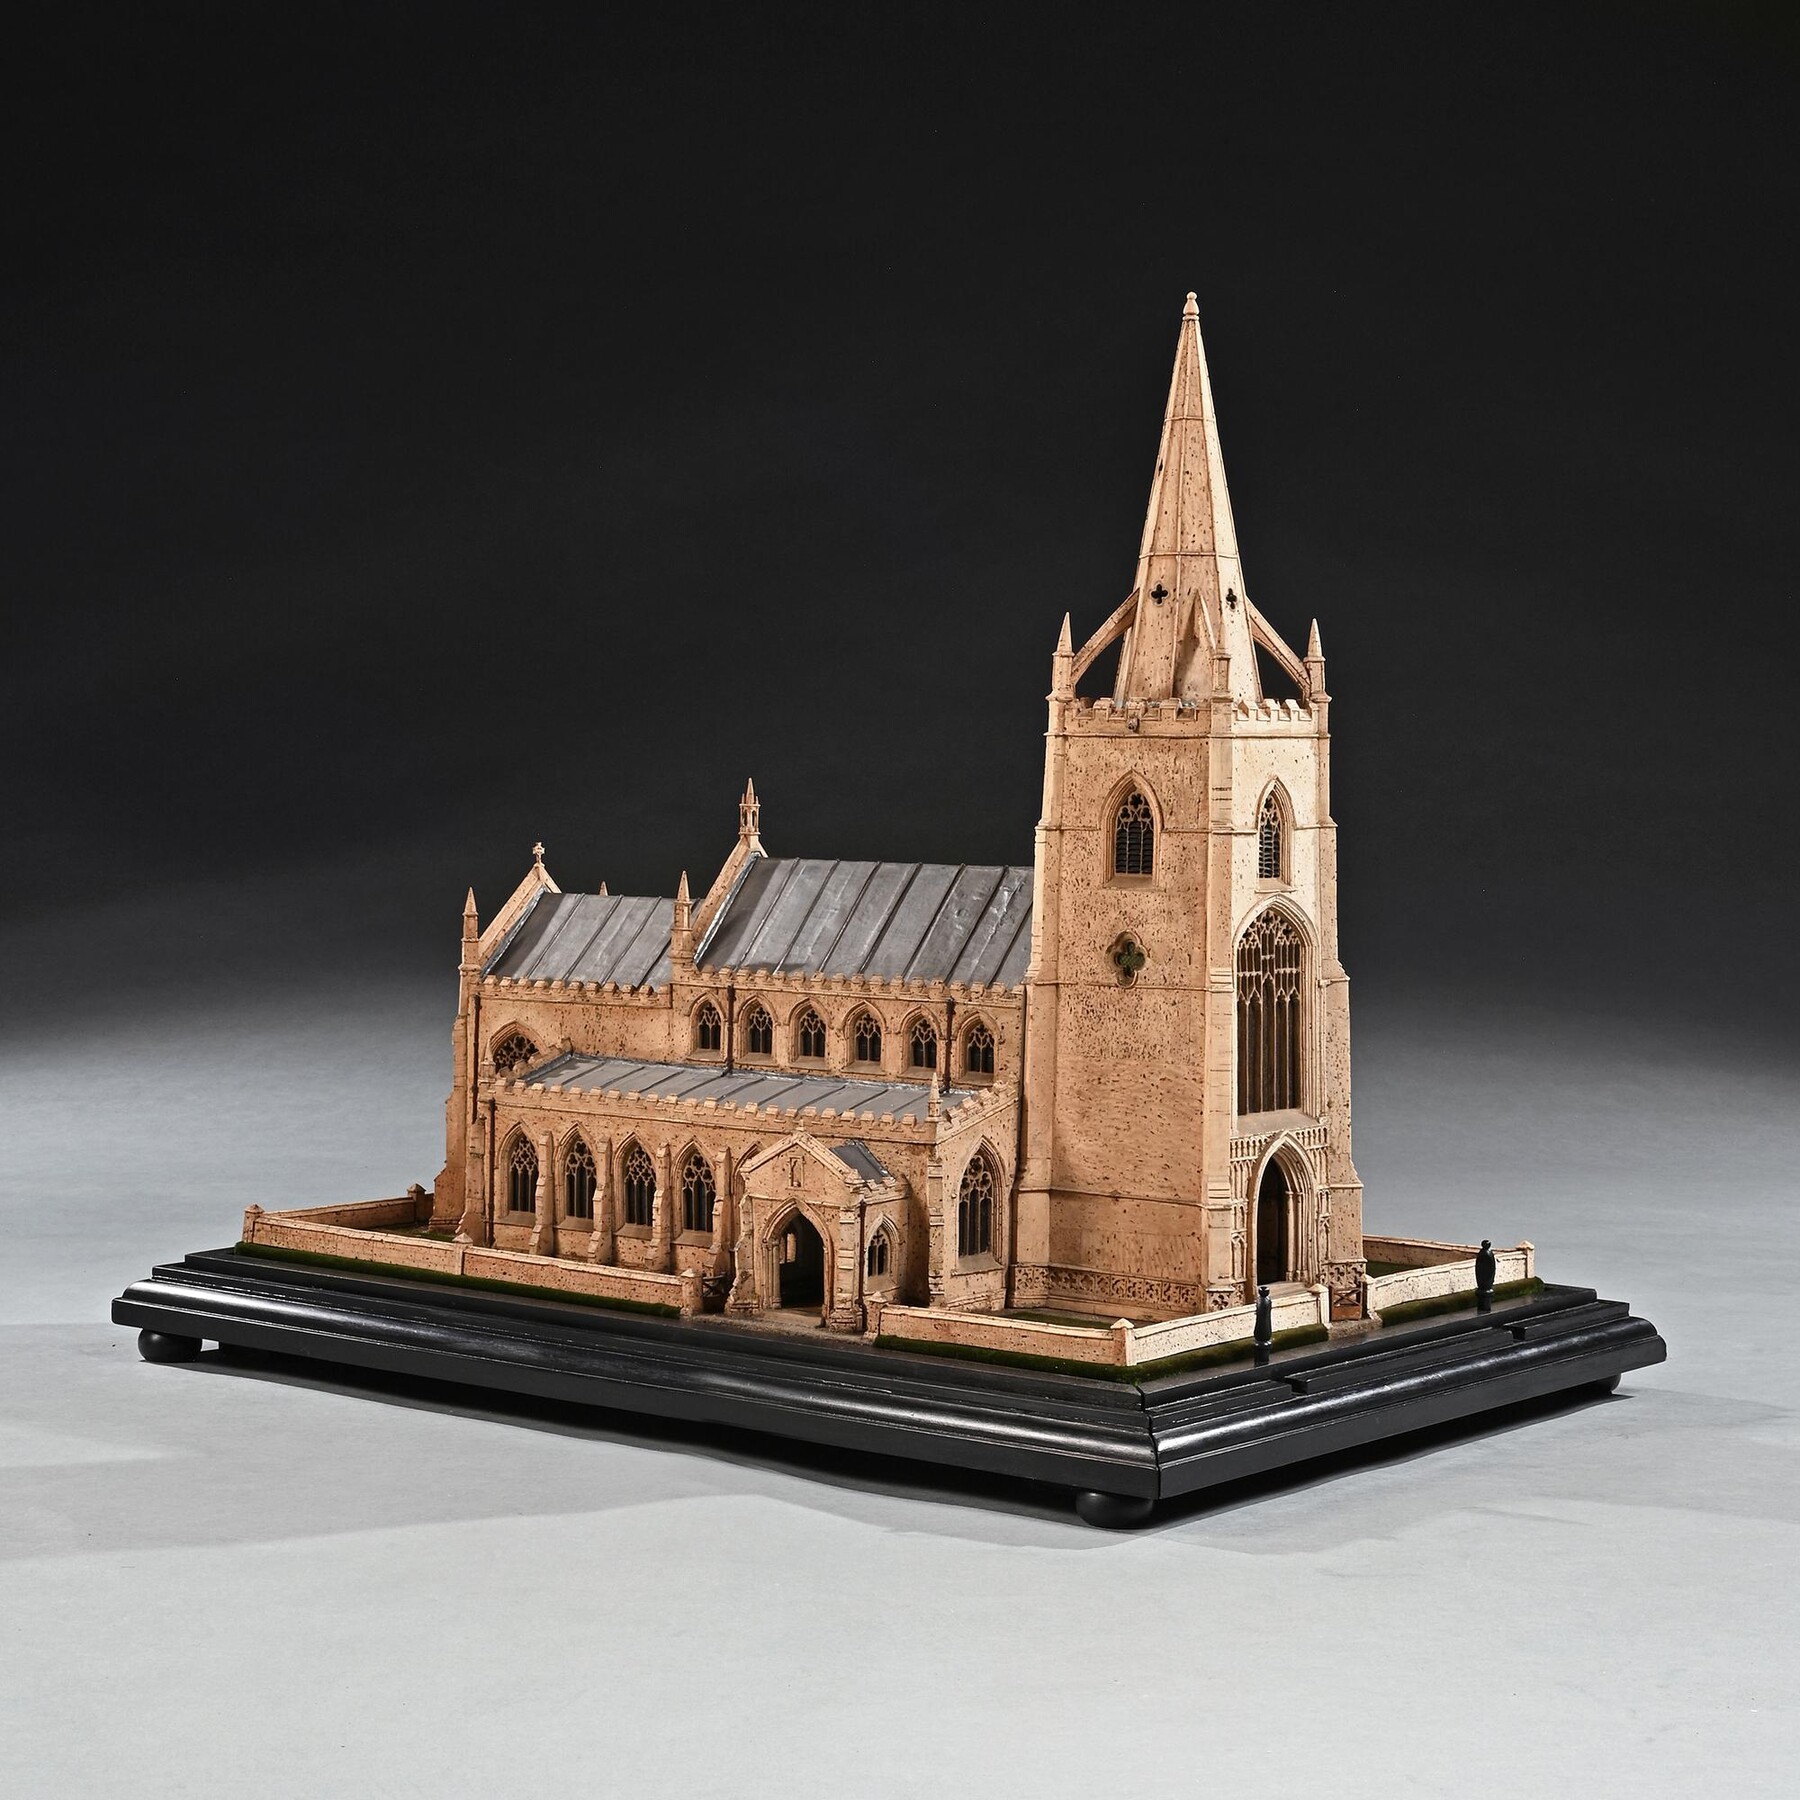 Spectacular Scale Architectural Model of an English Church